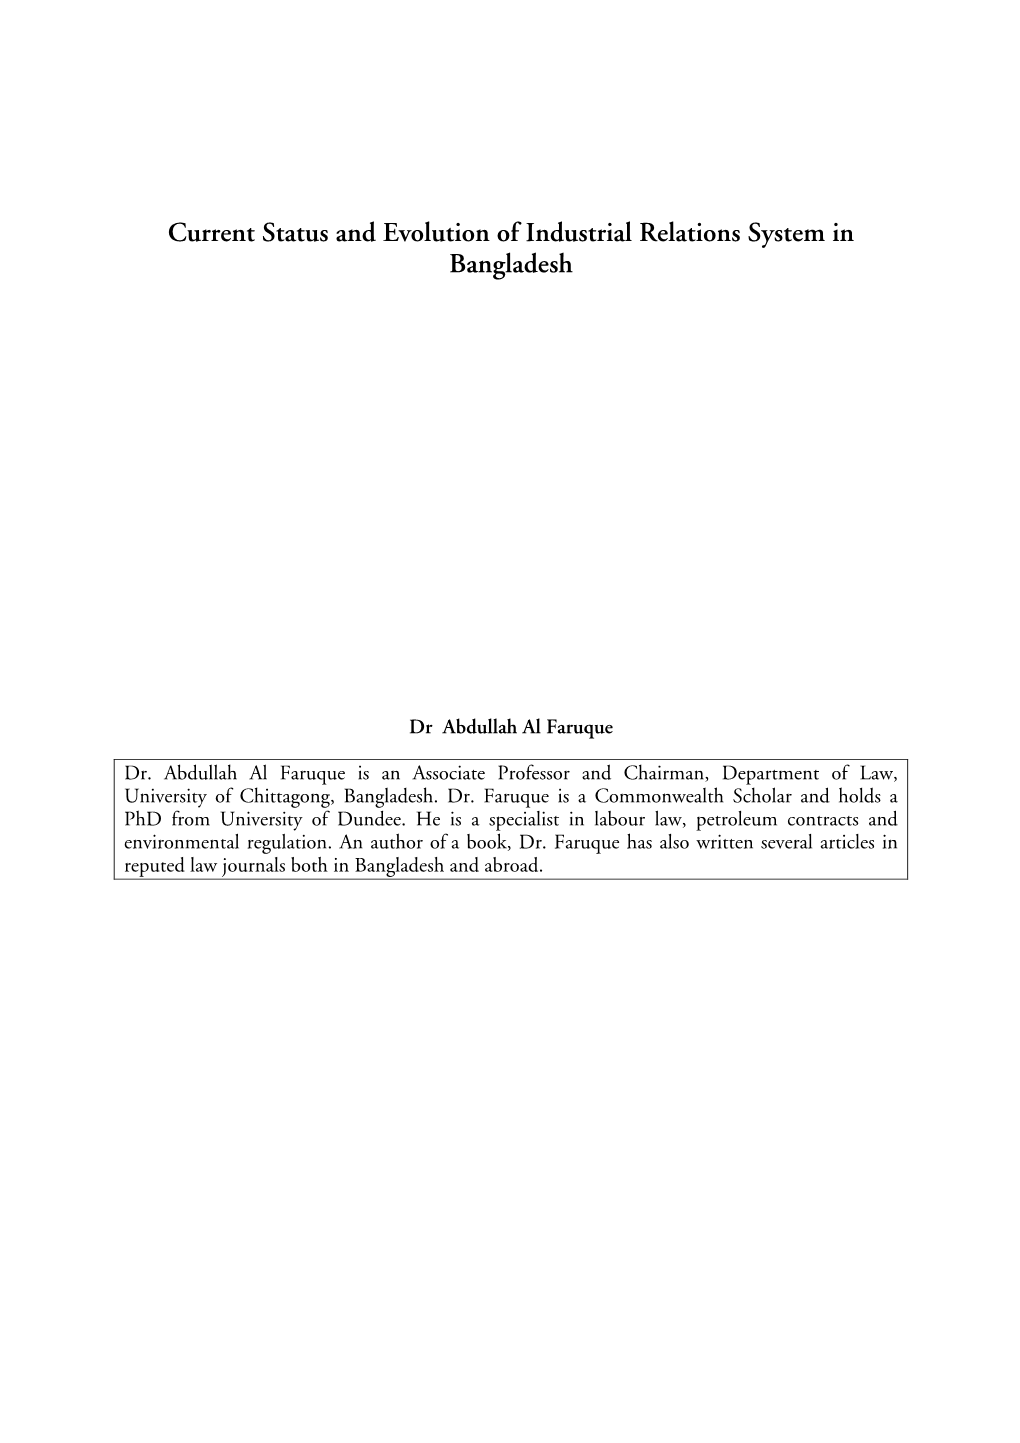 Current Status and Evolution of Industrial Relations System in Bangladesh